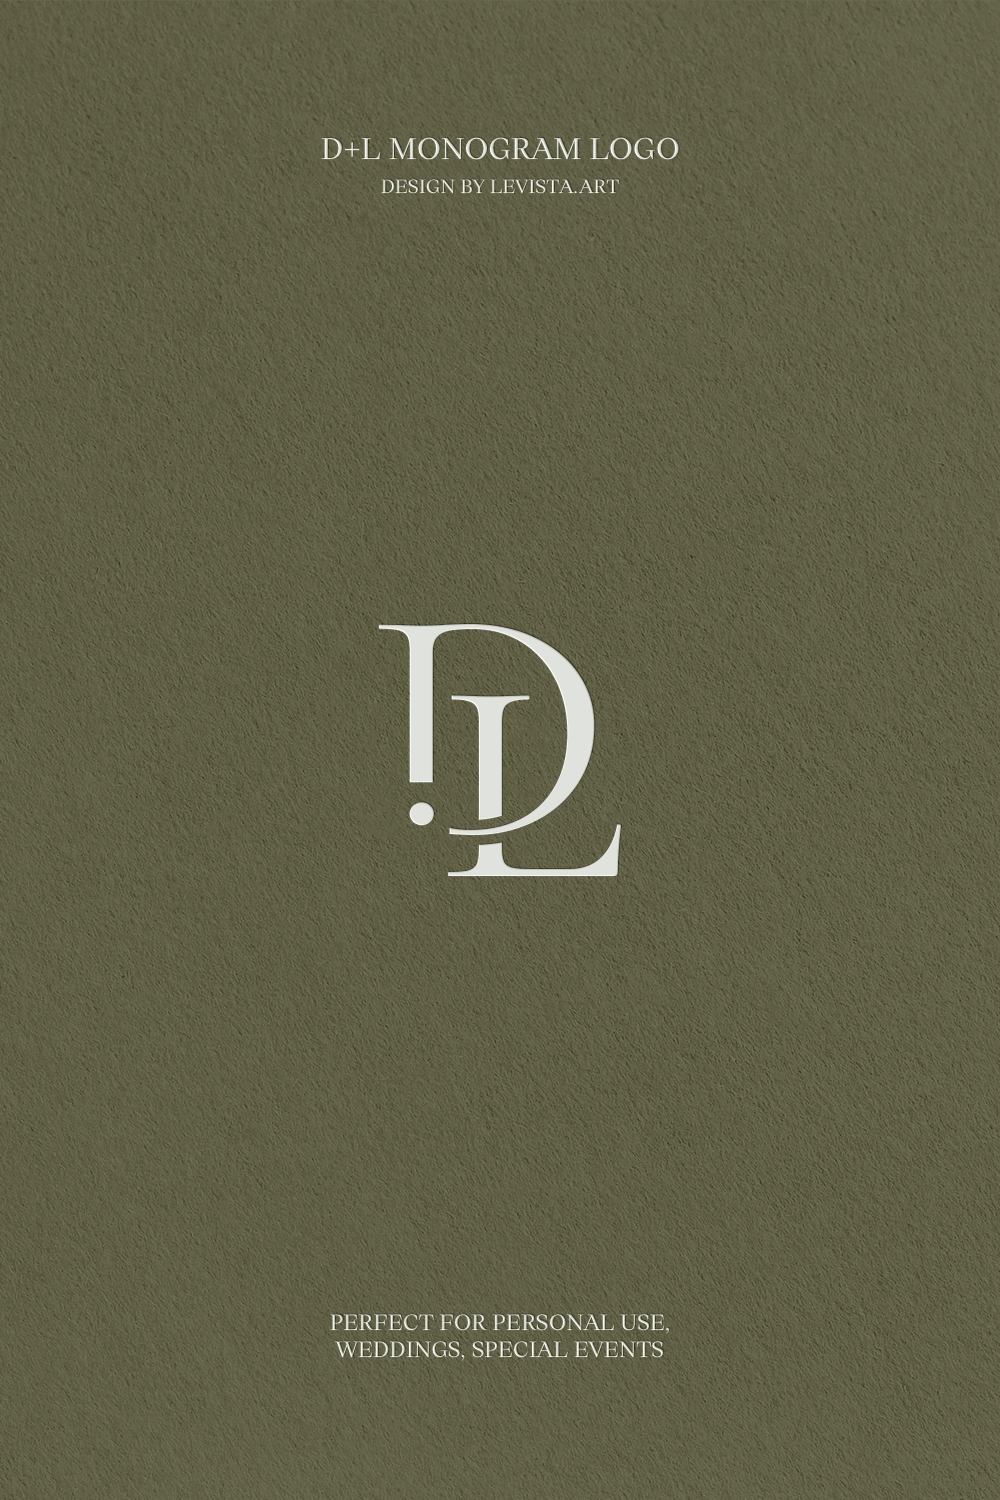 DL monogram logo design for personal use, celebrations, weddings, special events and occasions